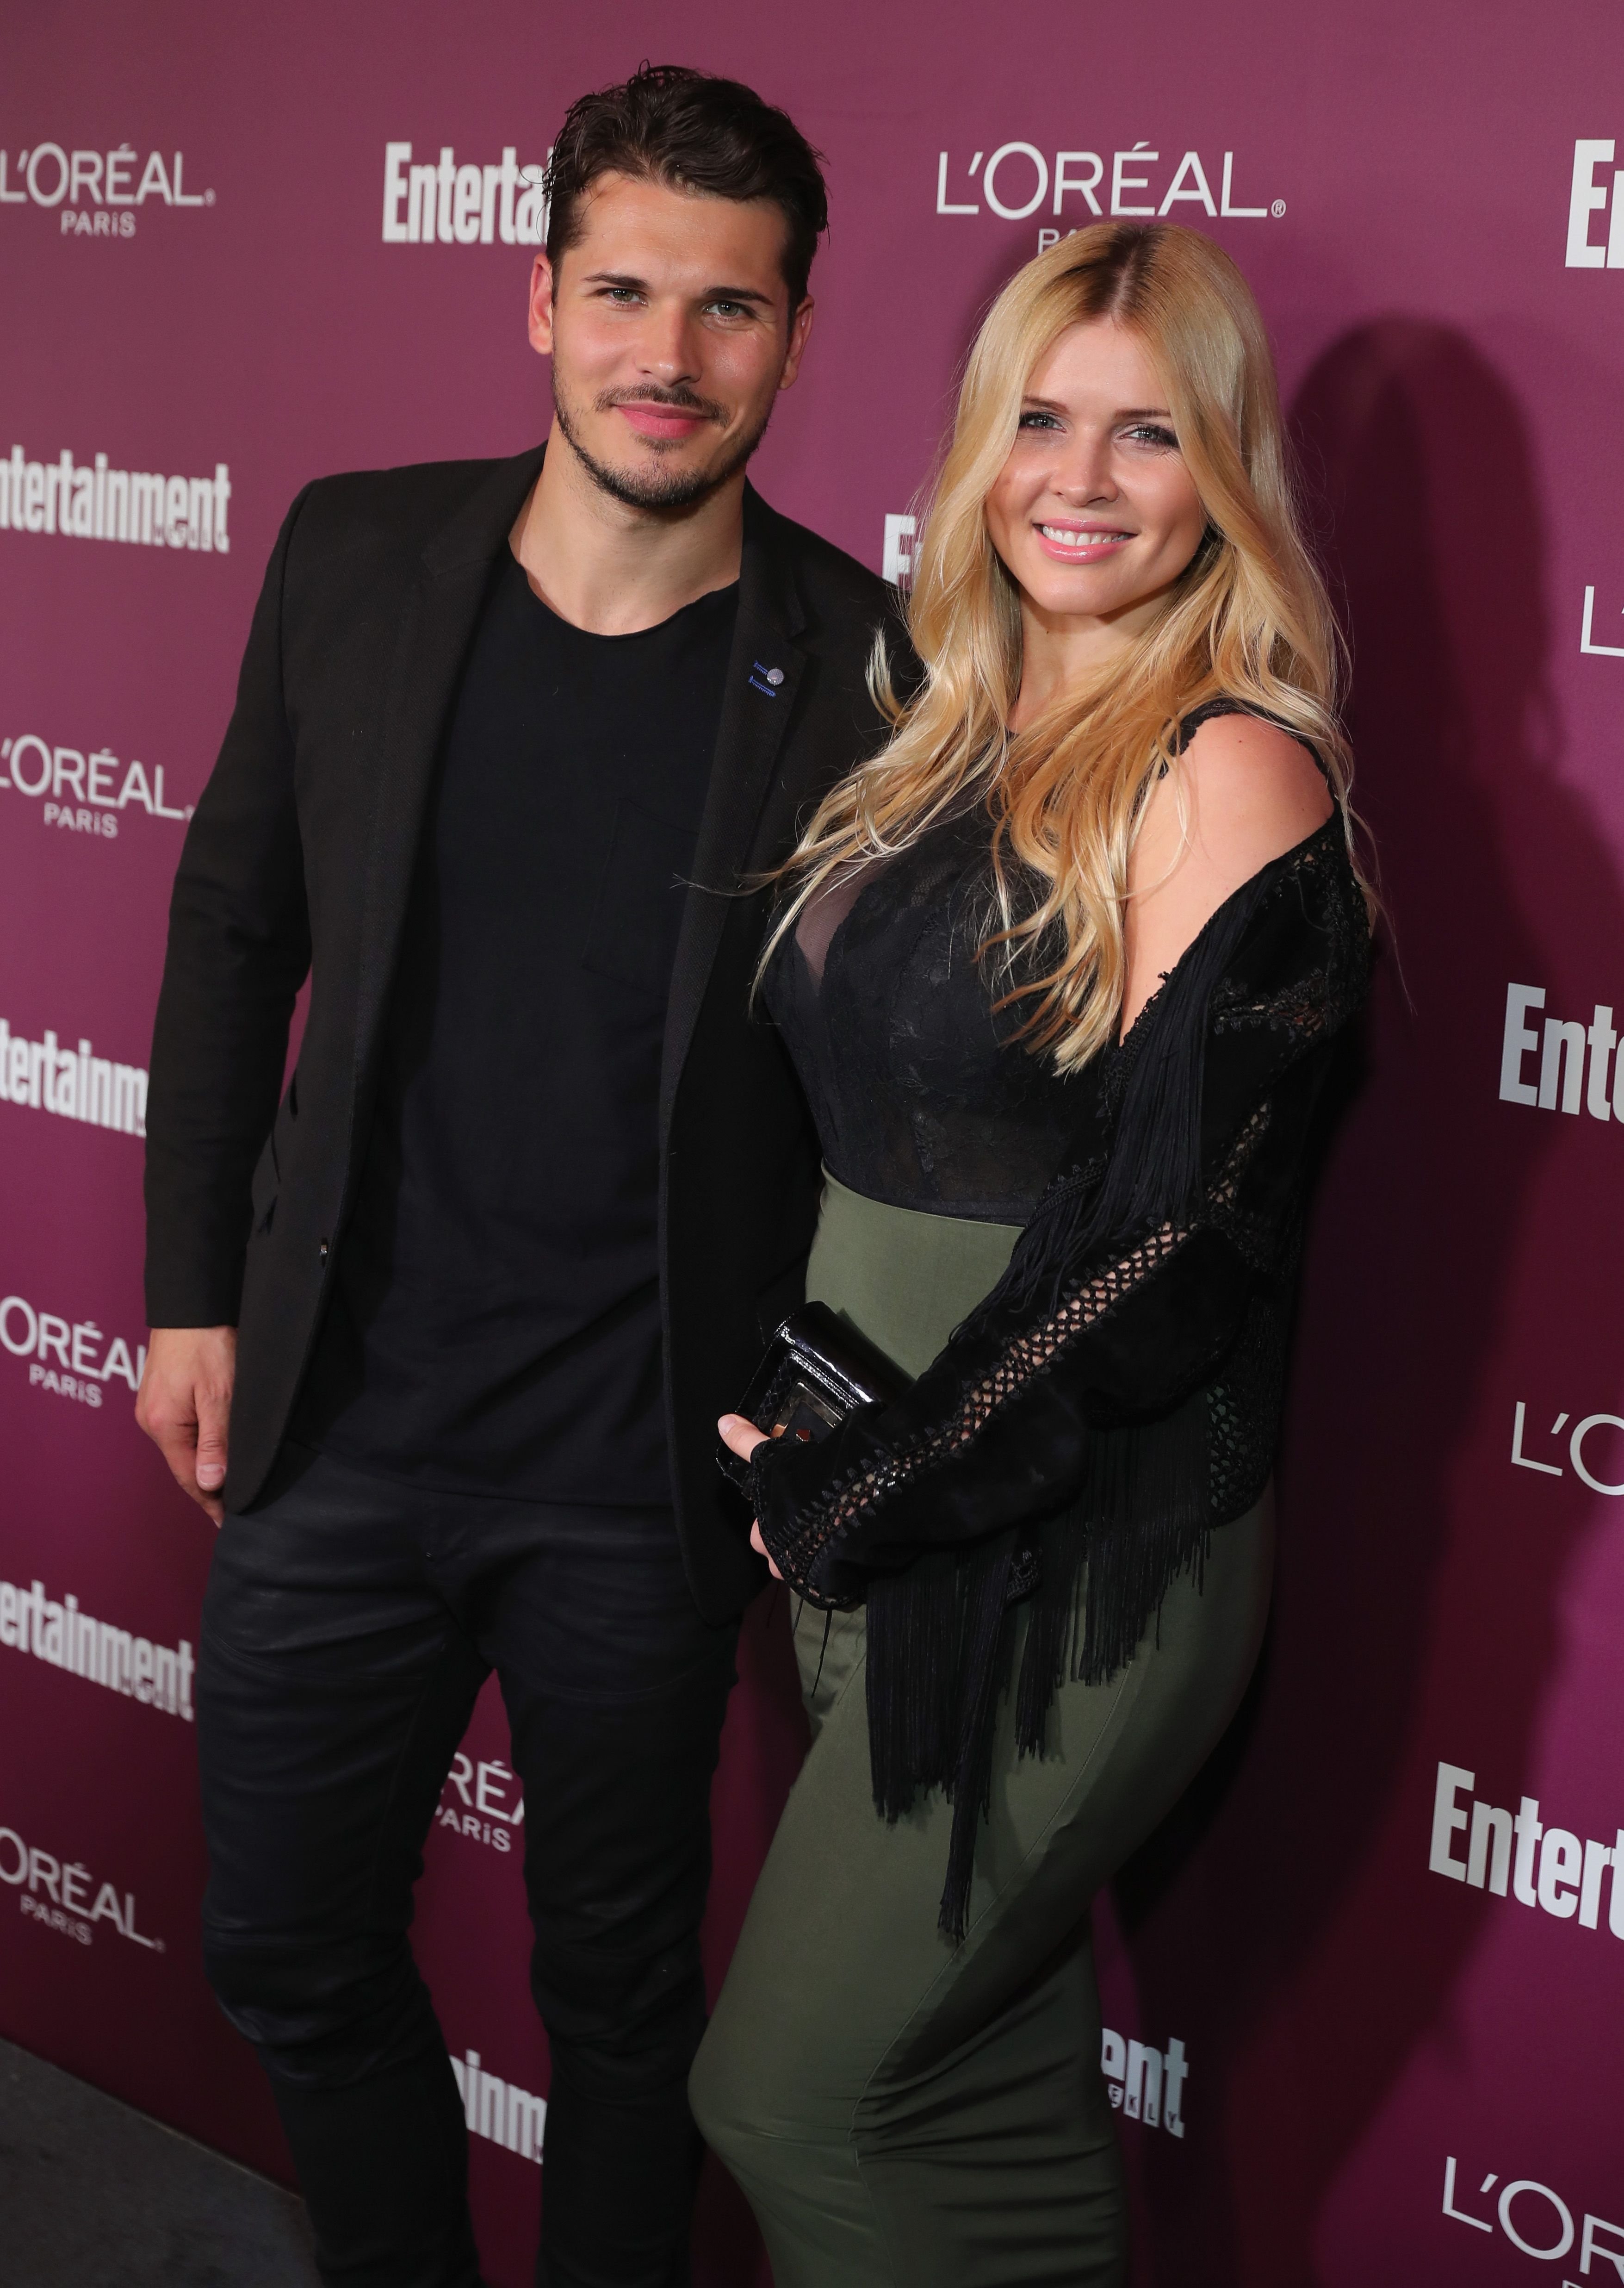 Gleb Savchenko and Elena Samodanova at the 2017 Entertainment Weekly Pre-Emmy Party at Sunset Tower on September 15, 2017 | Photo: Getty Images